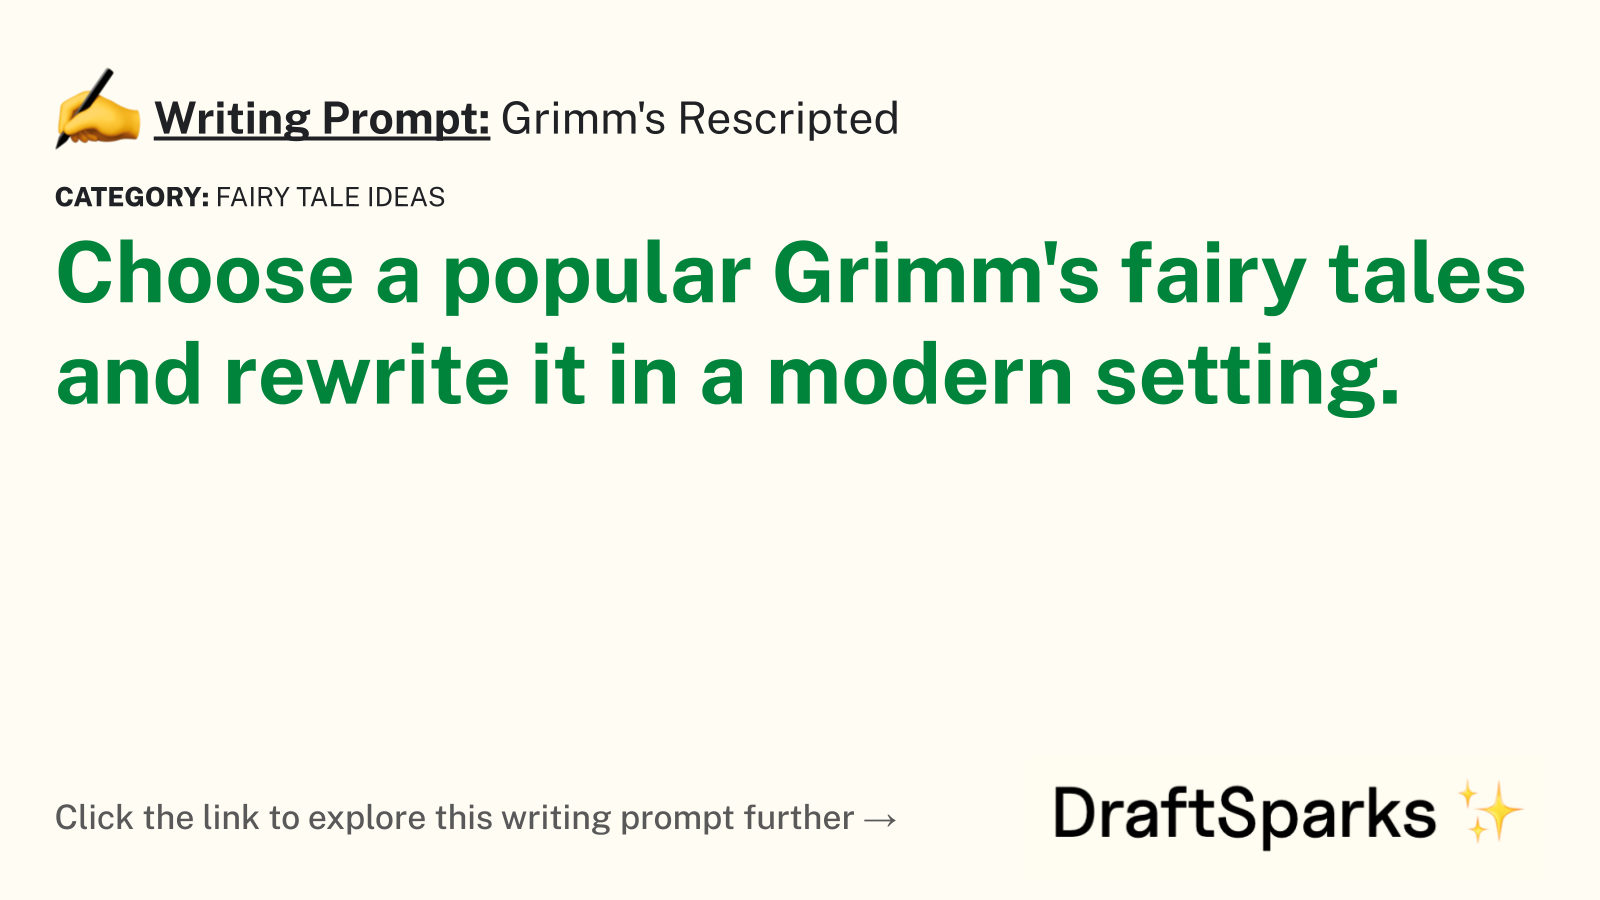 Grimm’s Rescripted